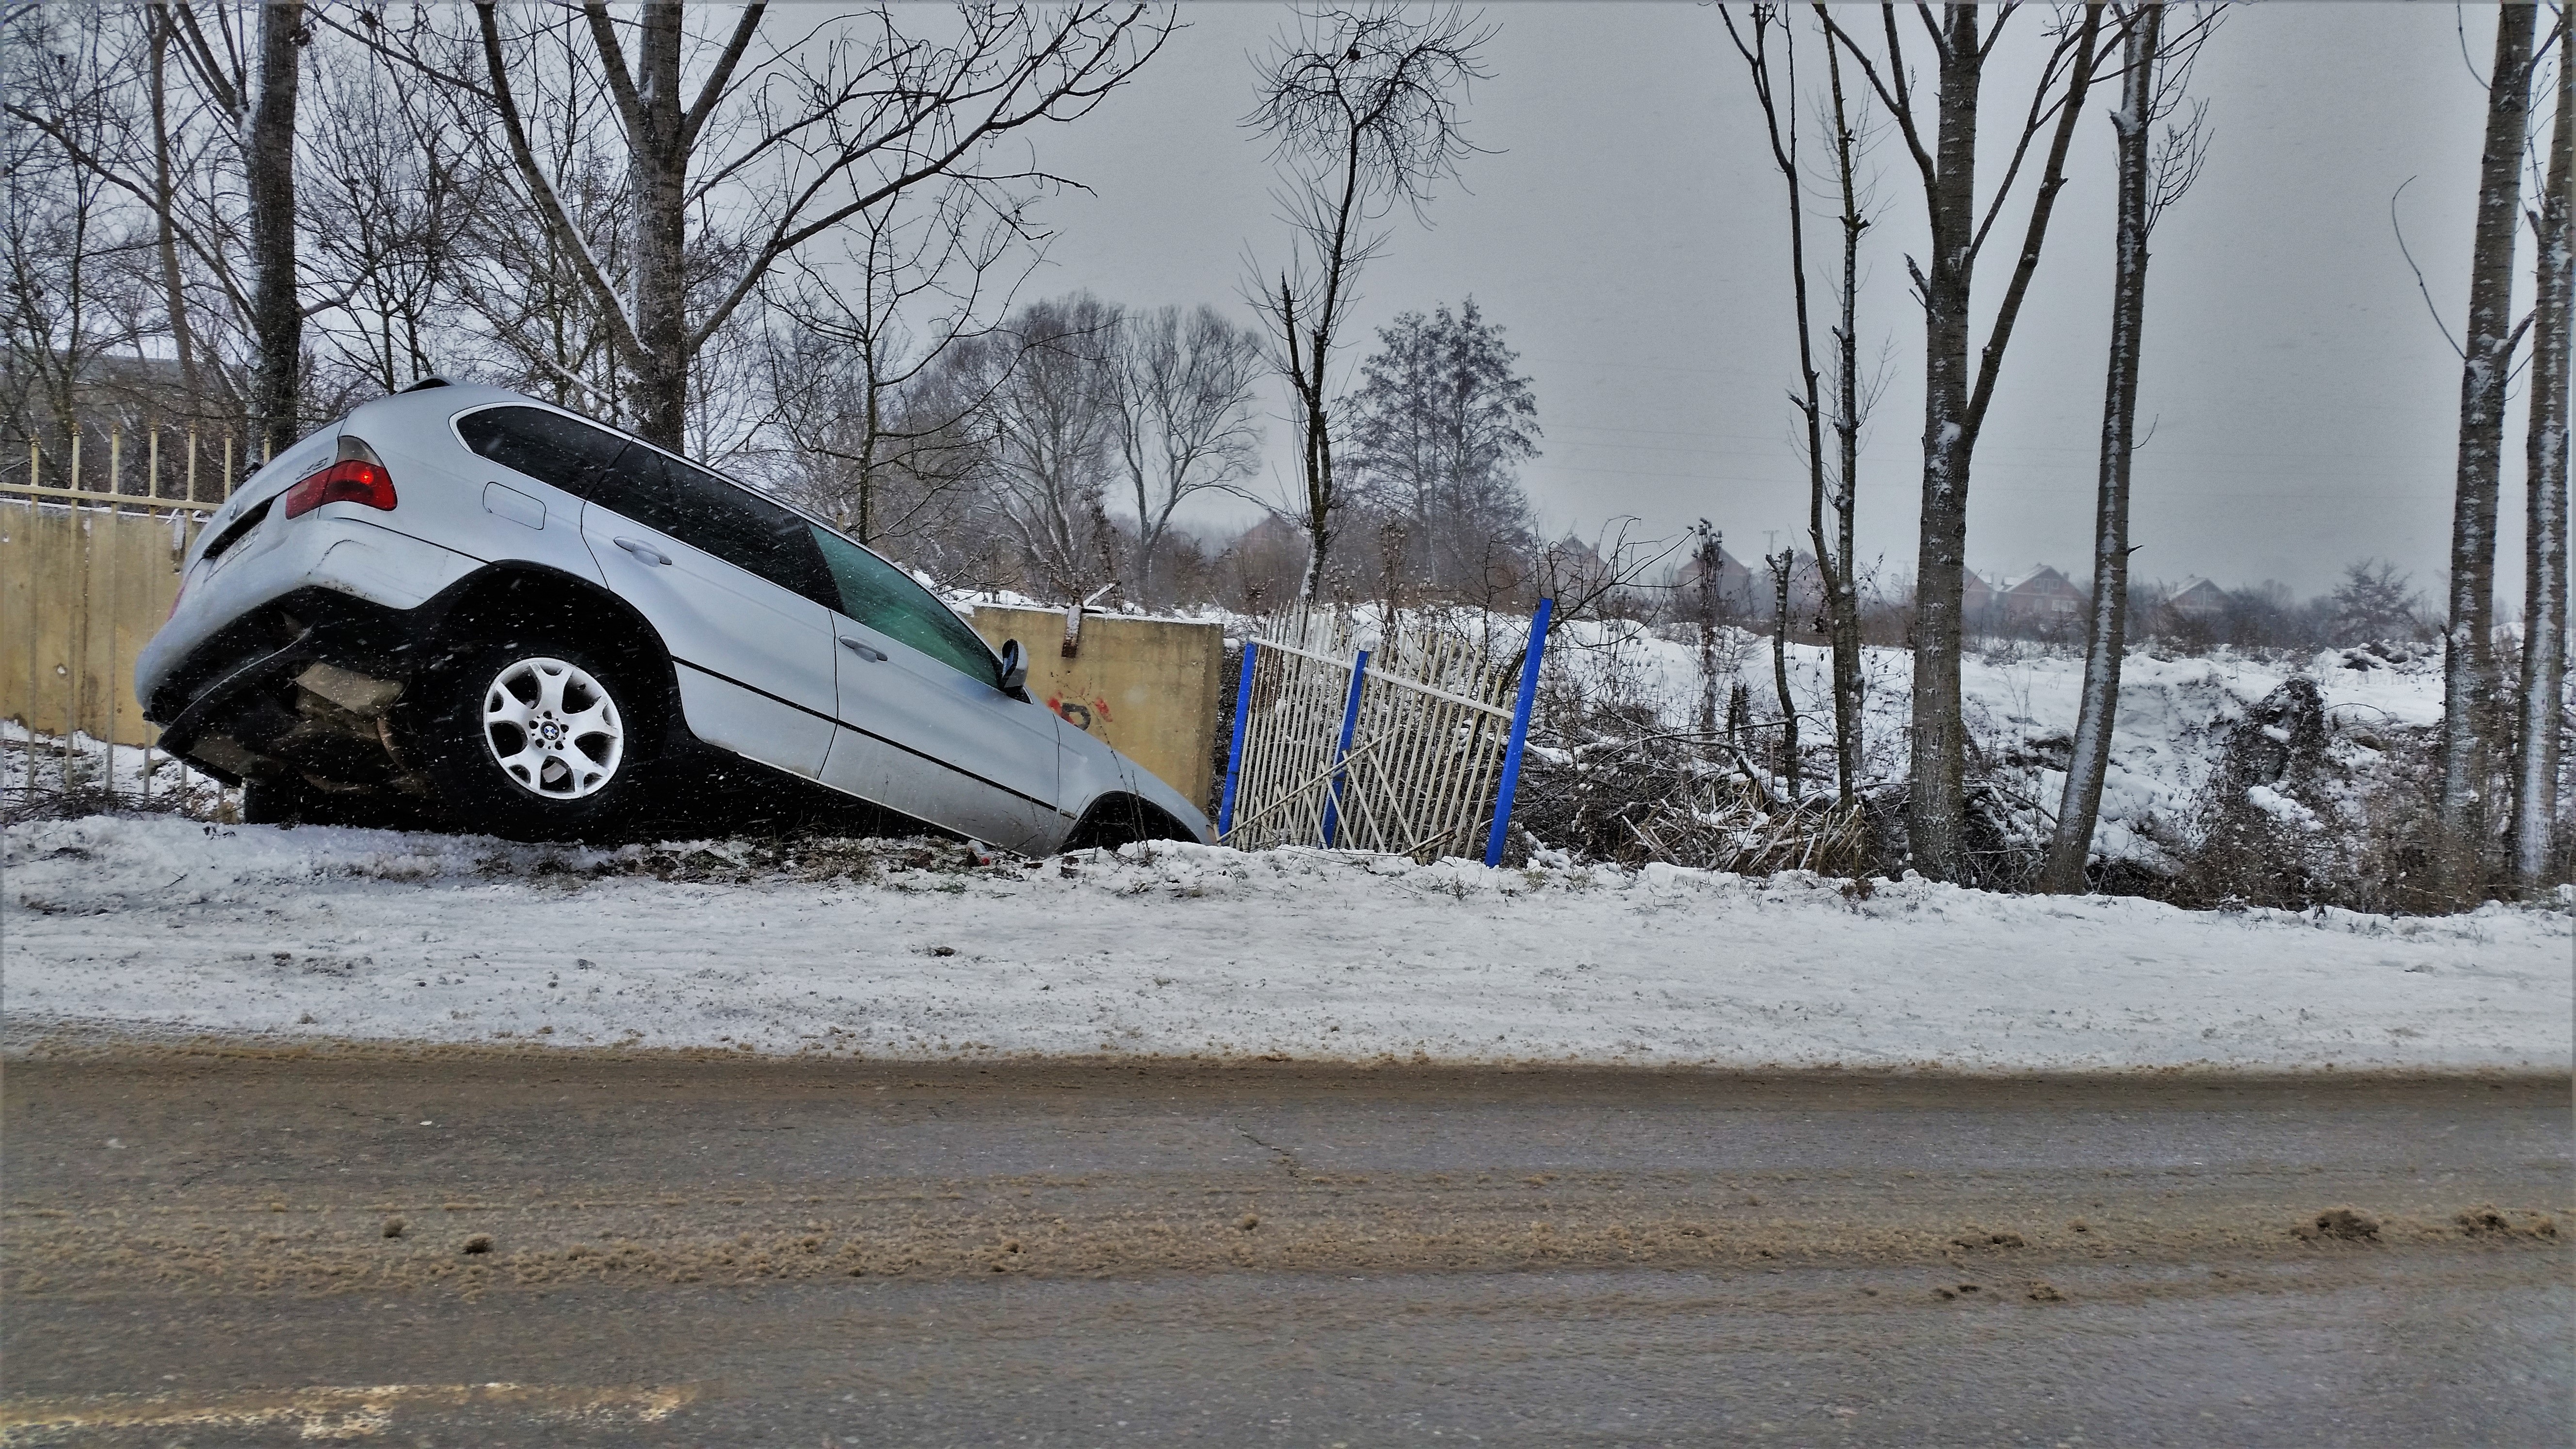 A car in the ditch having slid off a road because they did not consult Smoothly for a flatter way home.